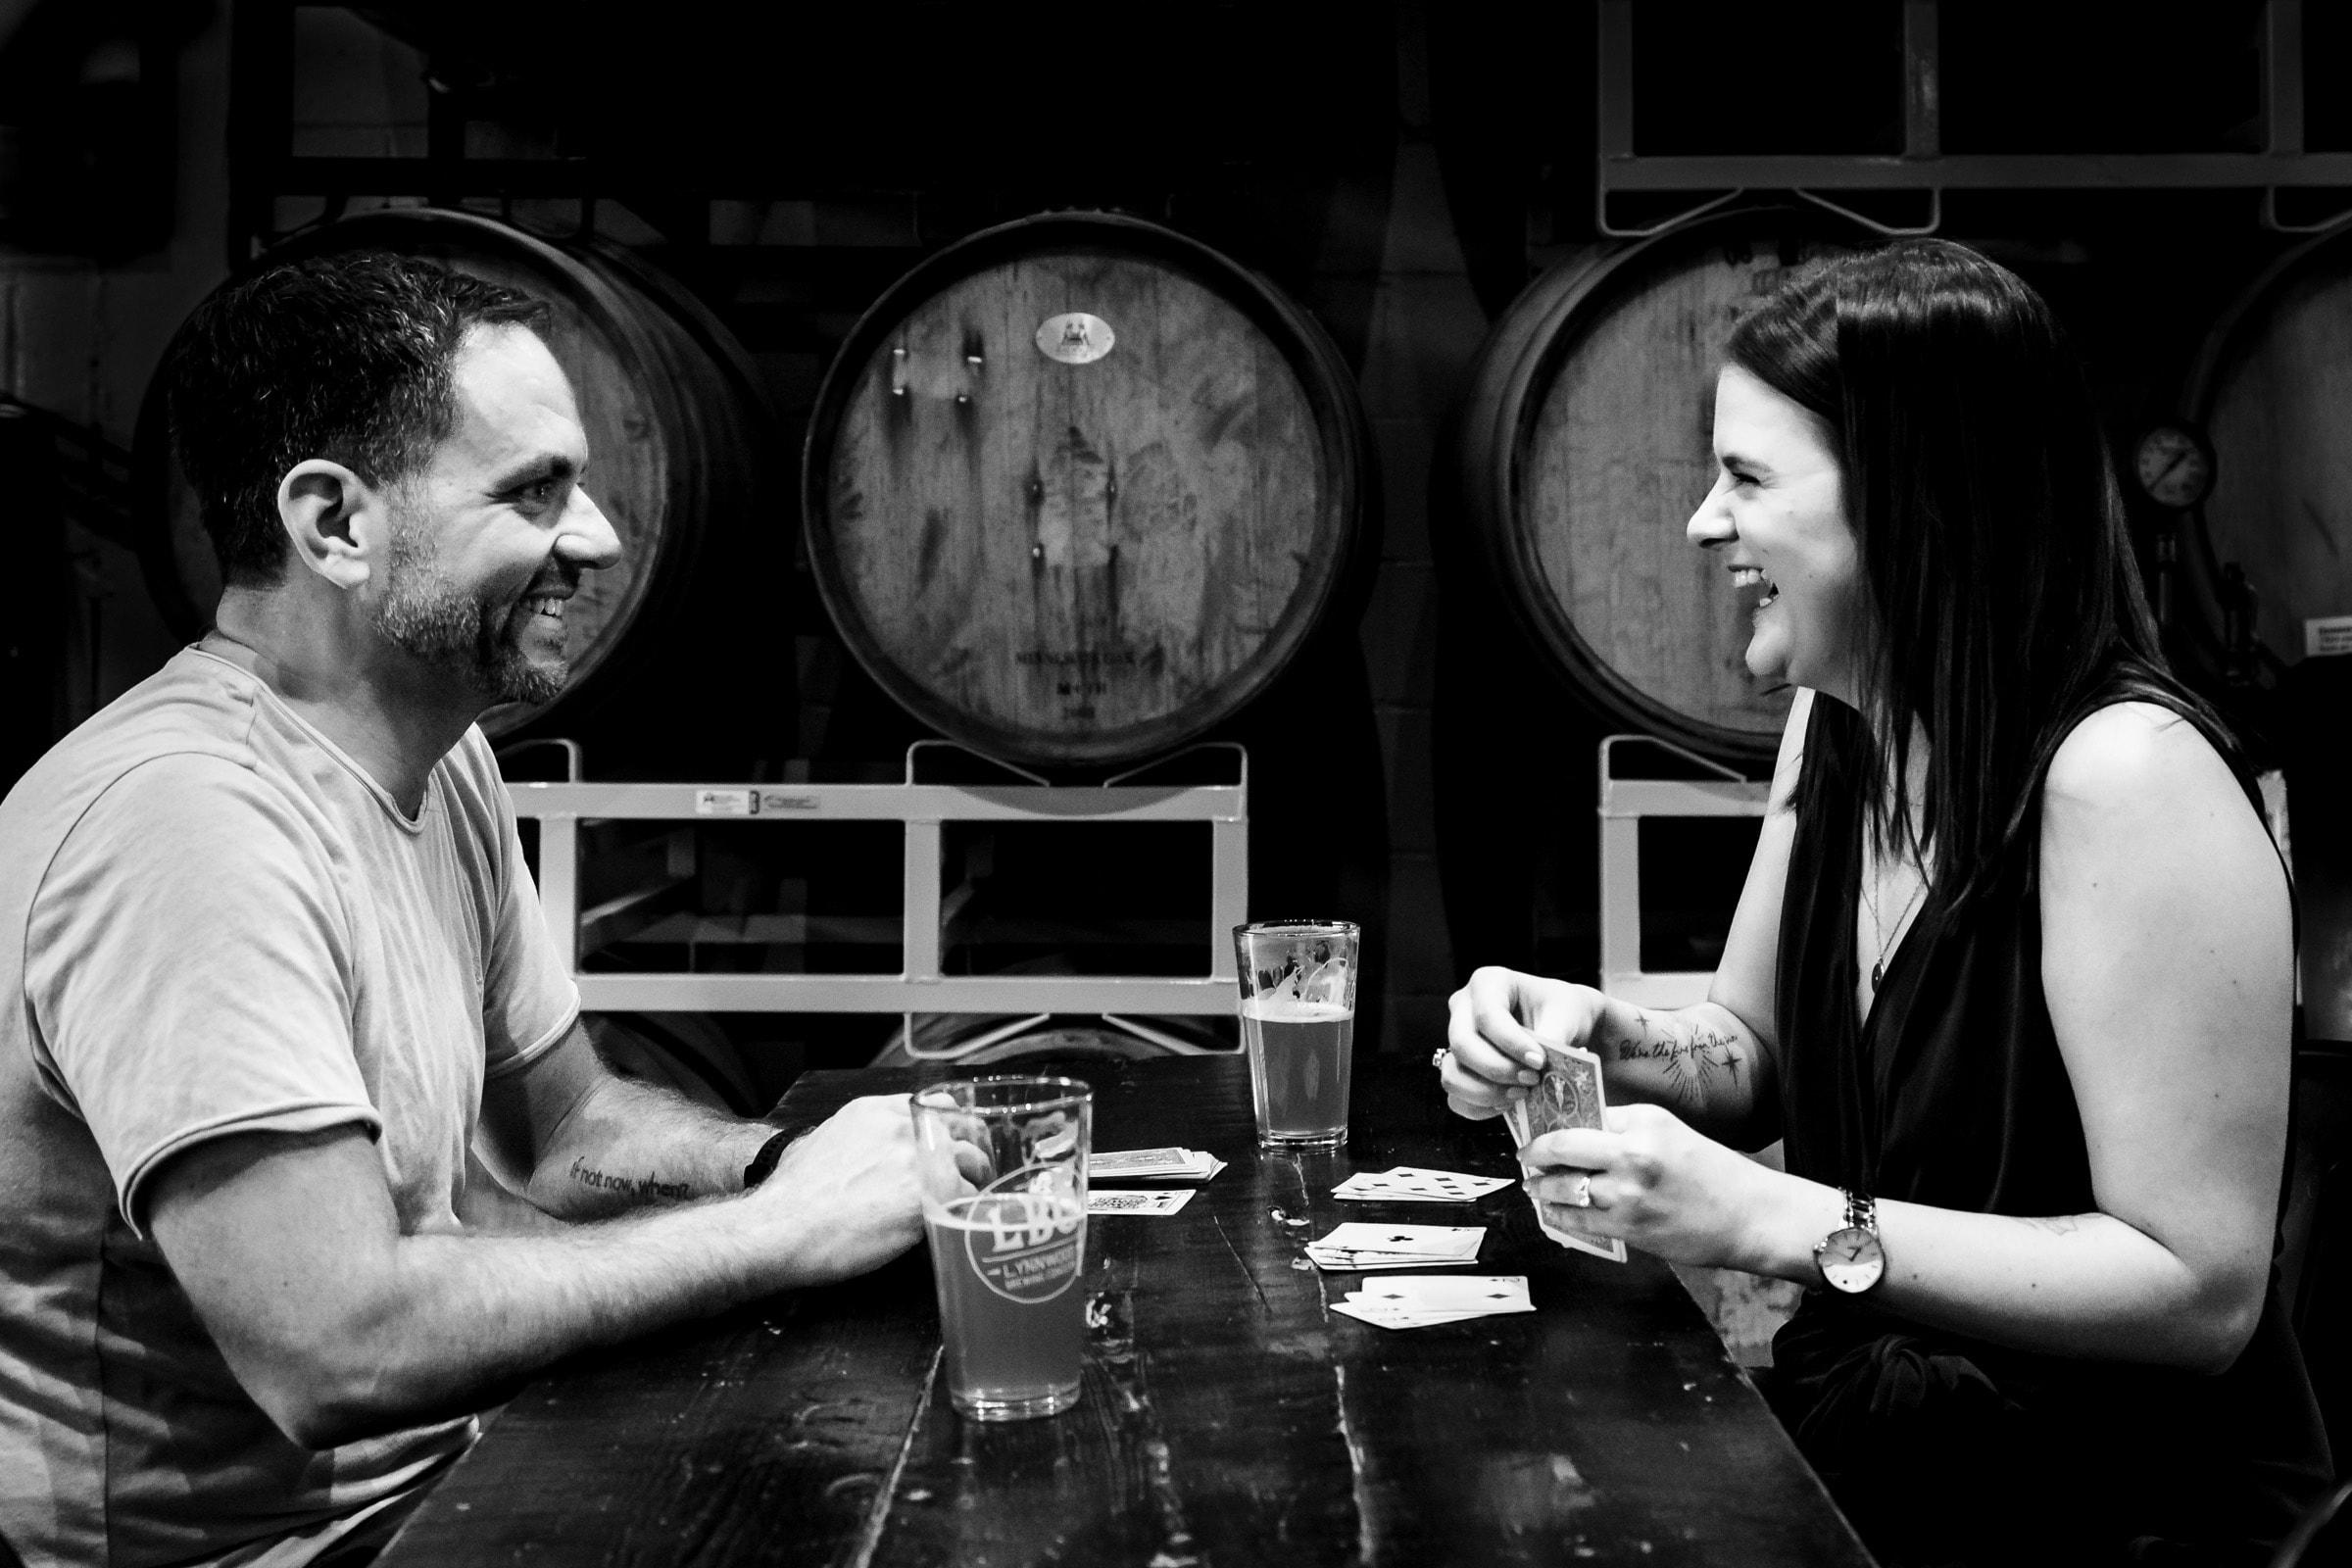 man and woman smile across a table at one another as they play cards